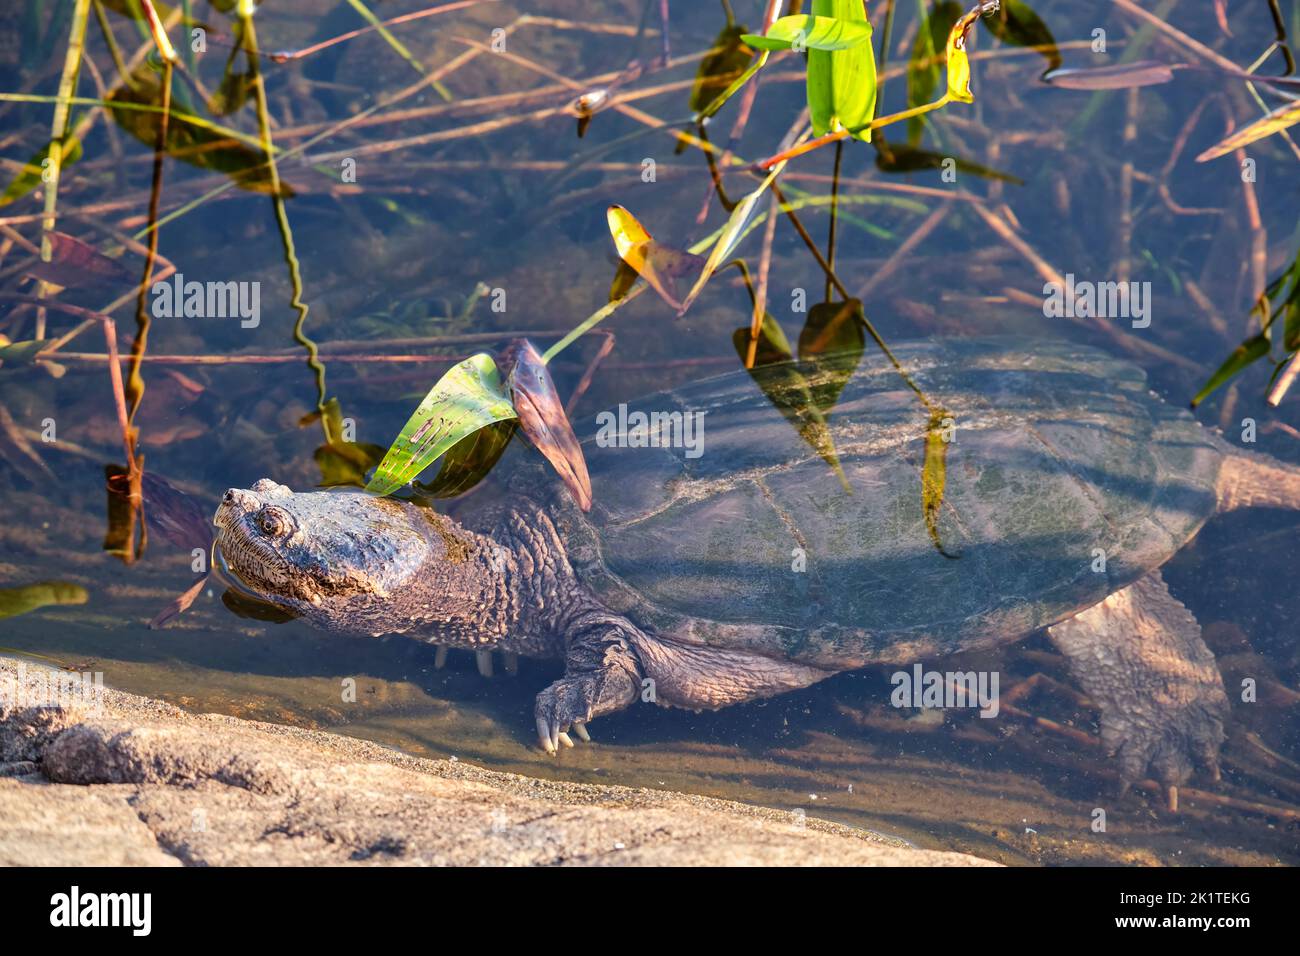 A snapping turtle swims along a rocky shoreline with its head out of the water in Crab Lake, Kawartha Highlands Provincial Park, Ontario. Stock Photo